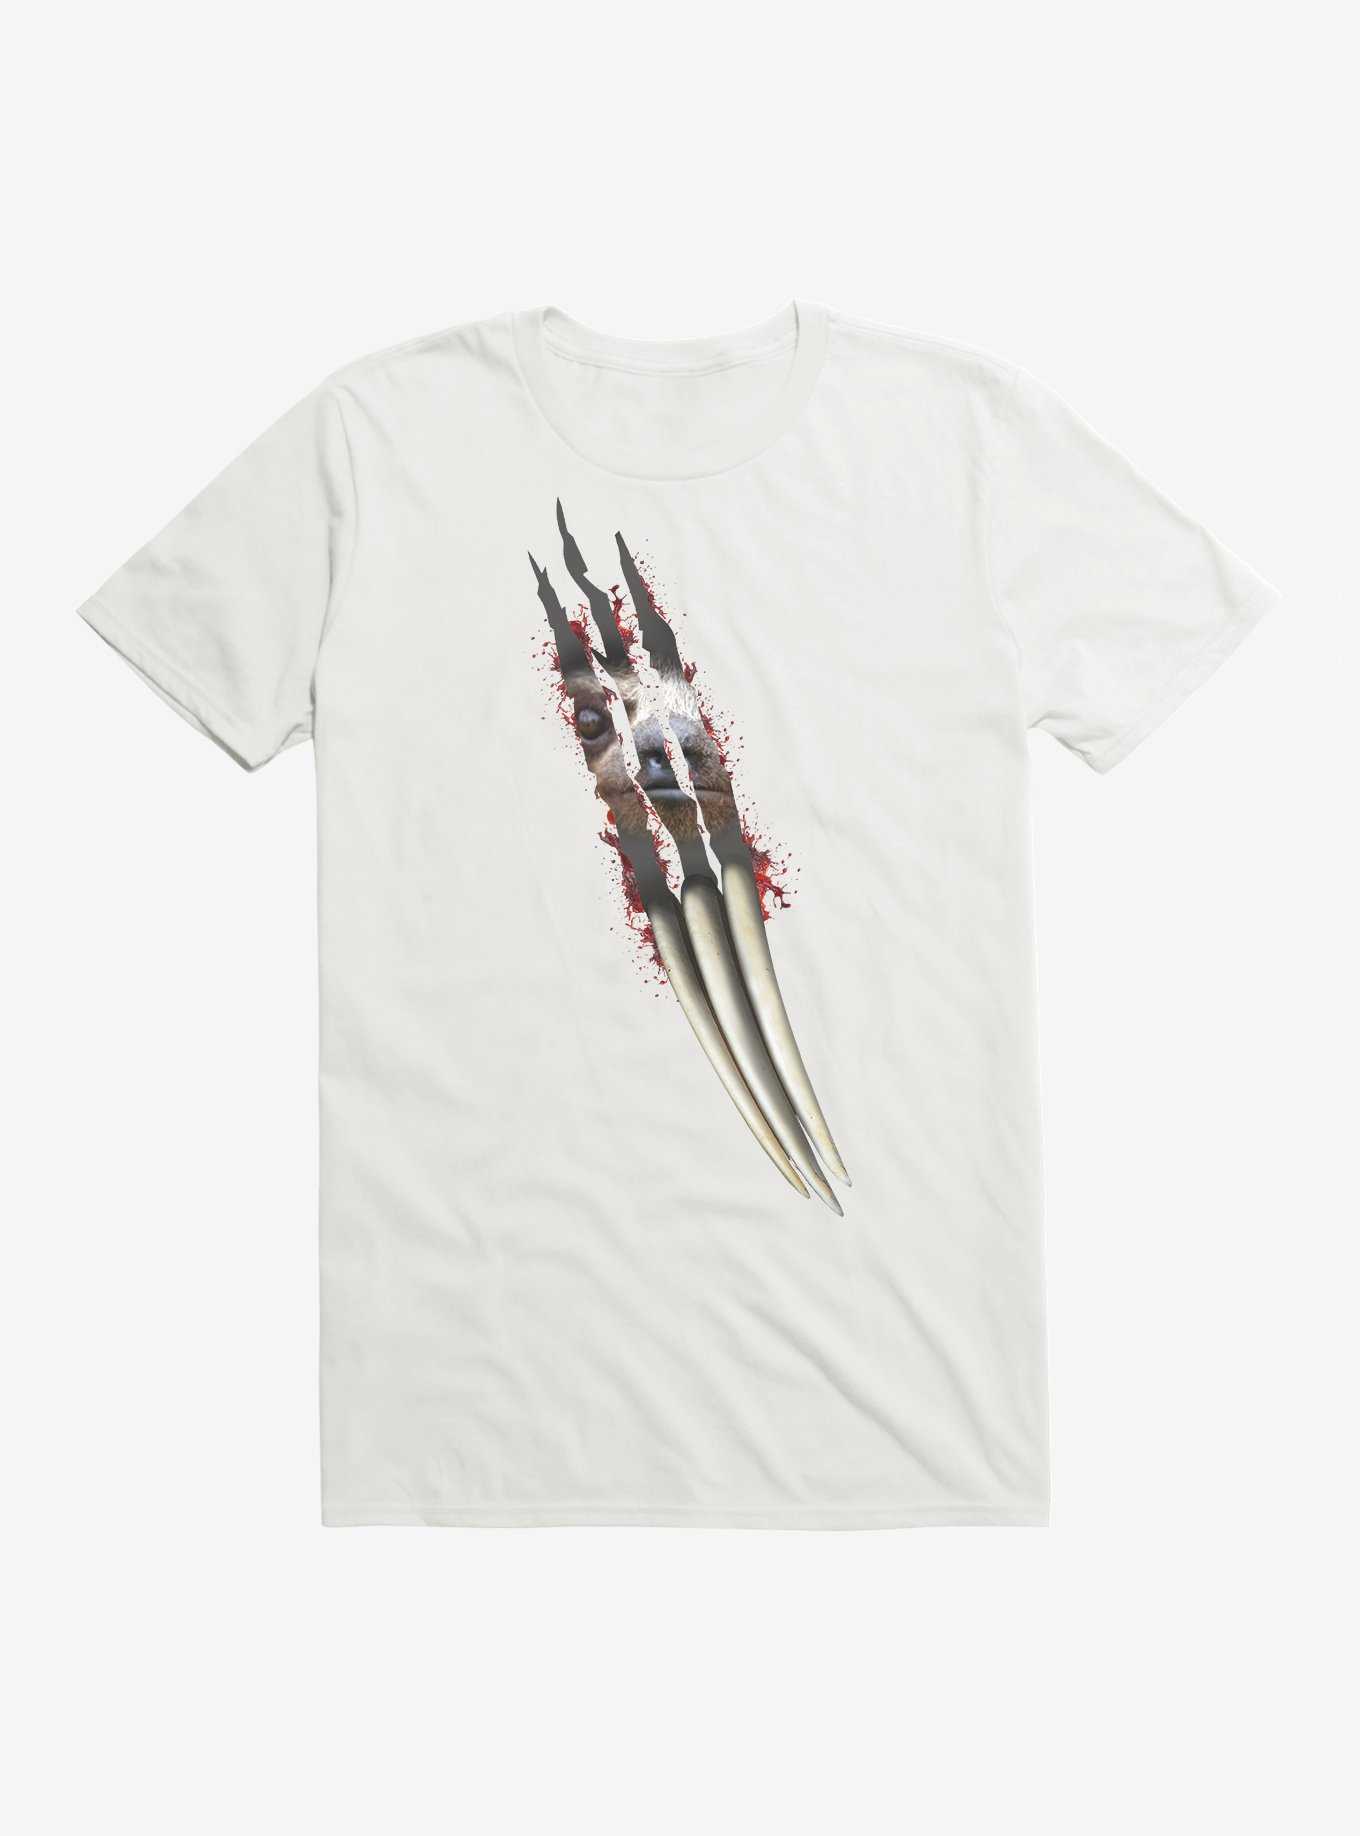 Hot Topic Scary Sloth Claws T-Shirt, , hi-res